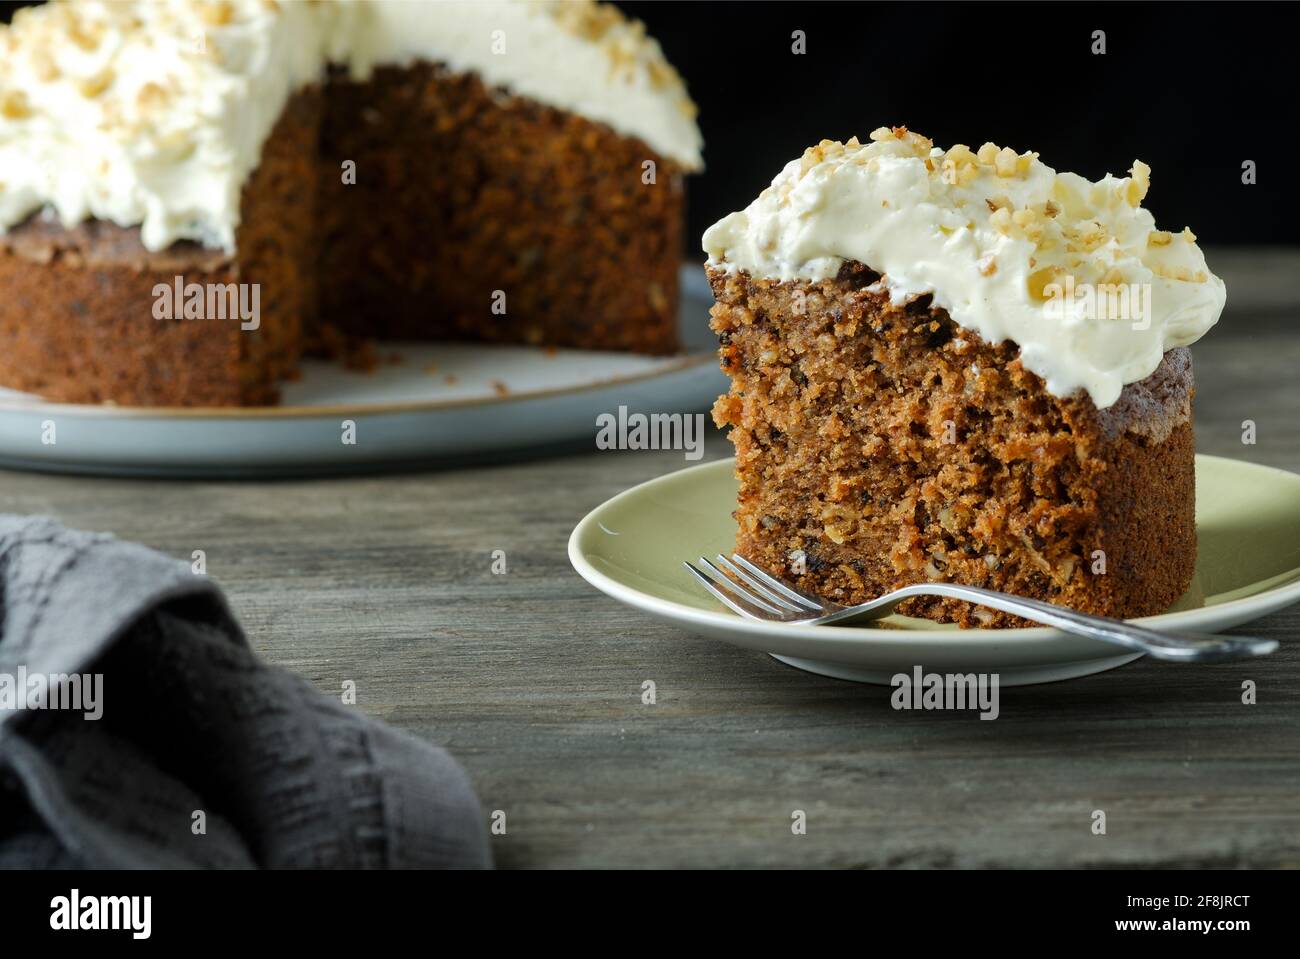 A home baked gluten free carrot and walnut cake. This moist cake has an indulgent cream cheese topping and was made with gluten free ingredients Stock Photo